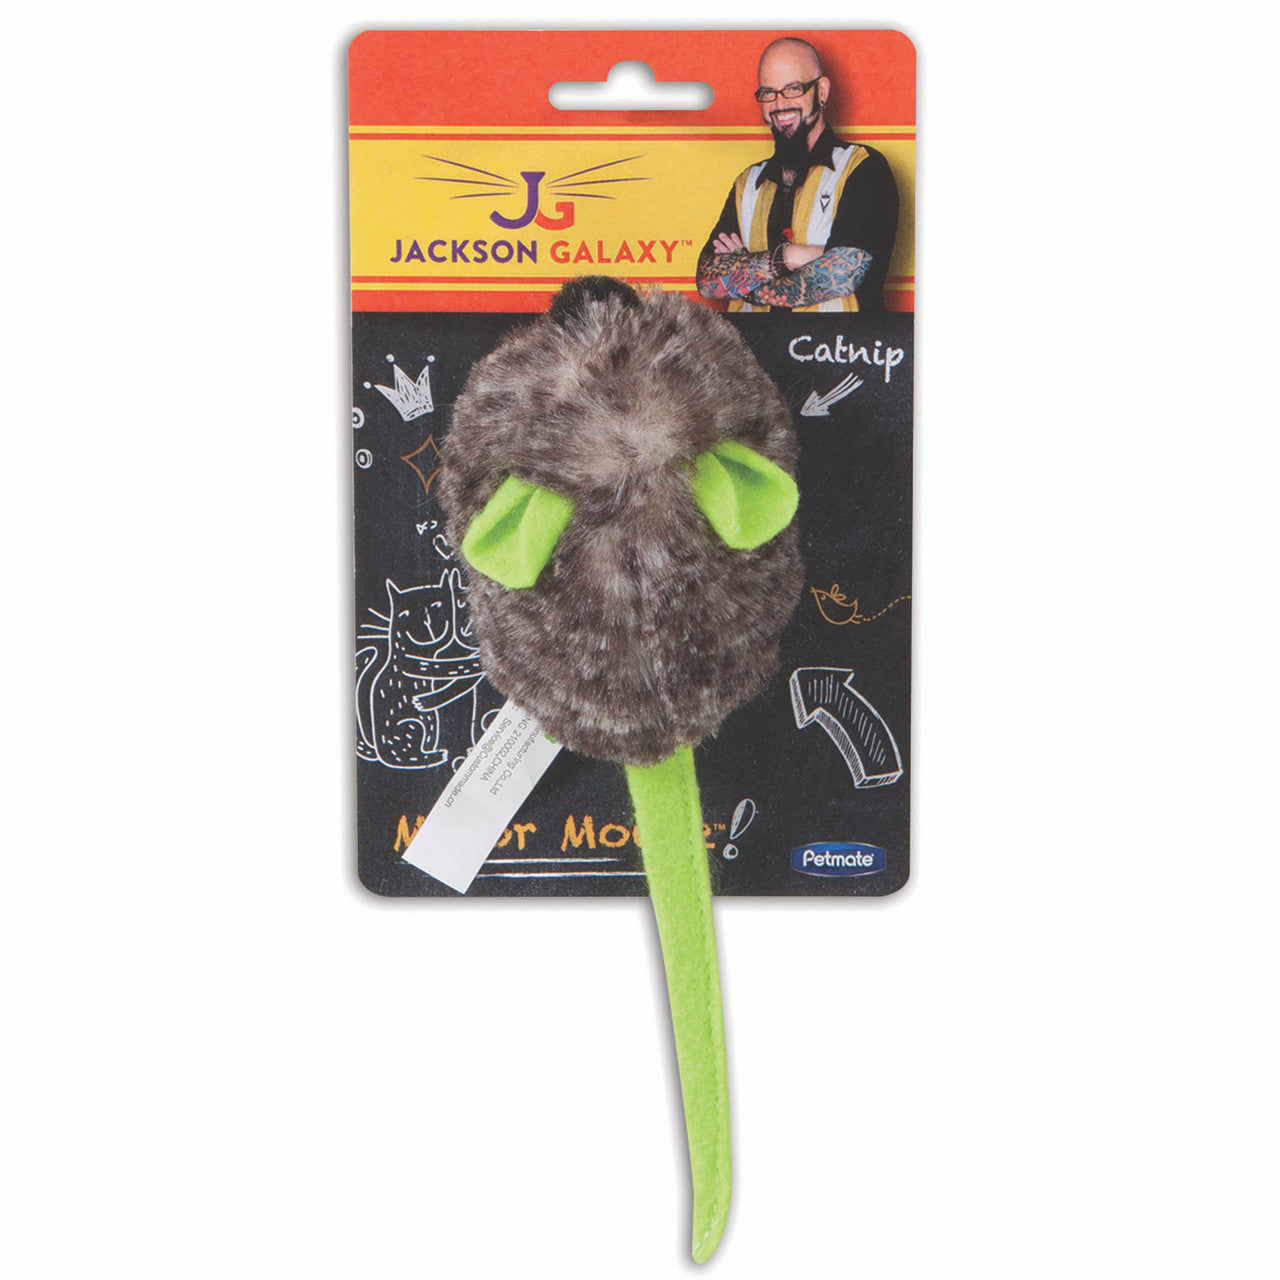 Jackson Galaxy Motor Mouse With Catnip Toy